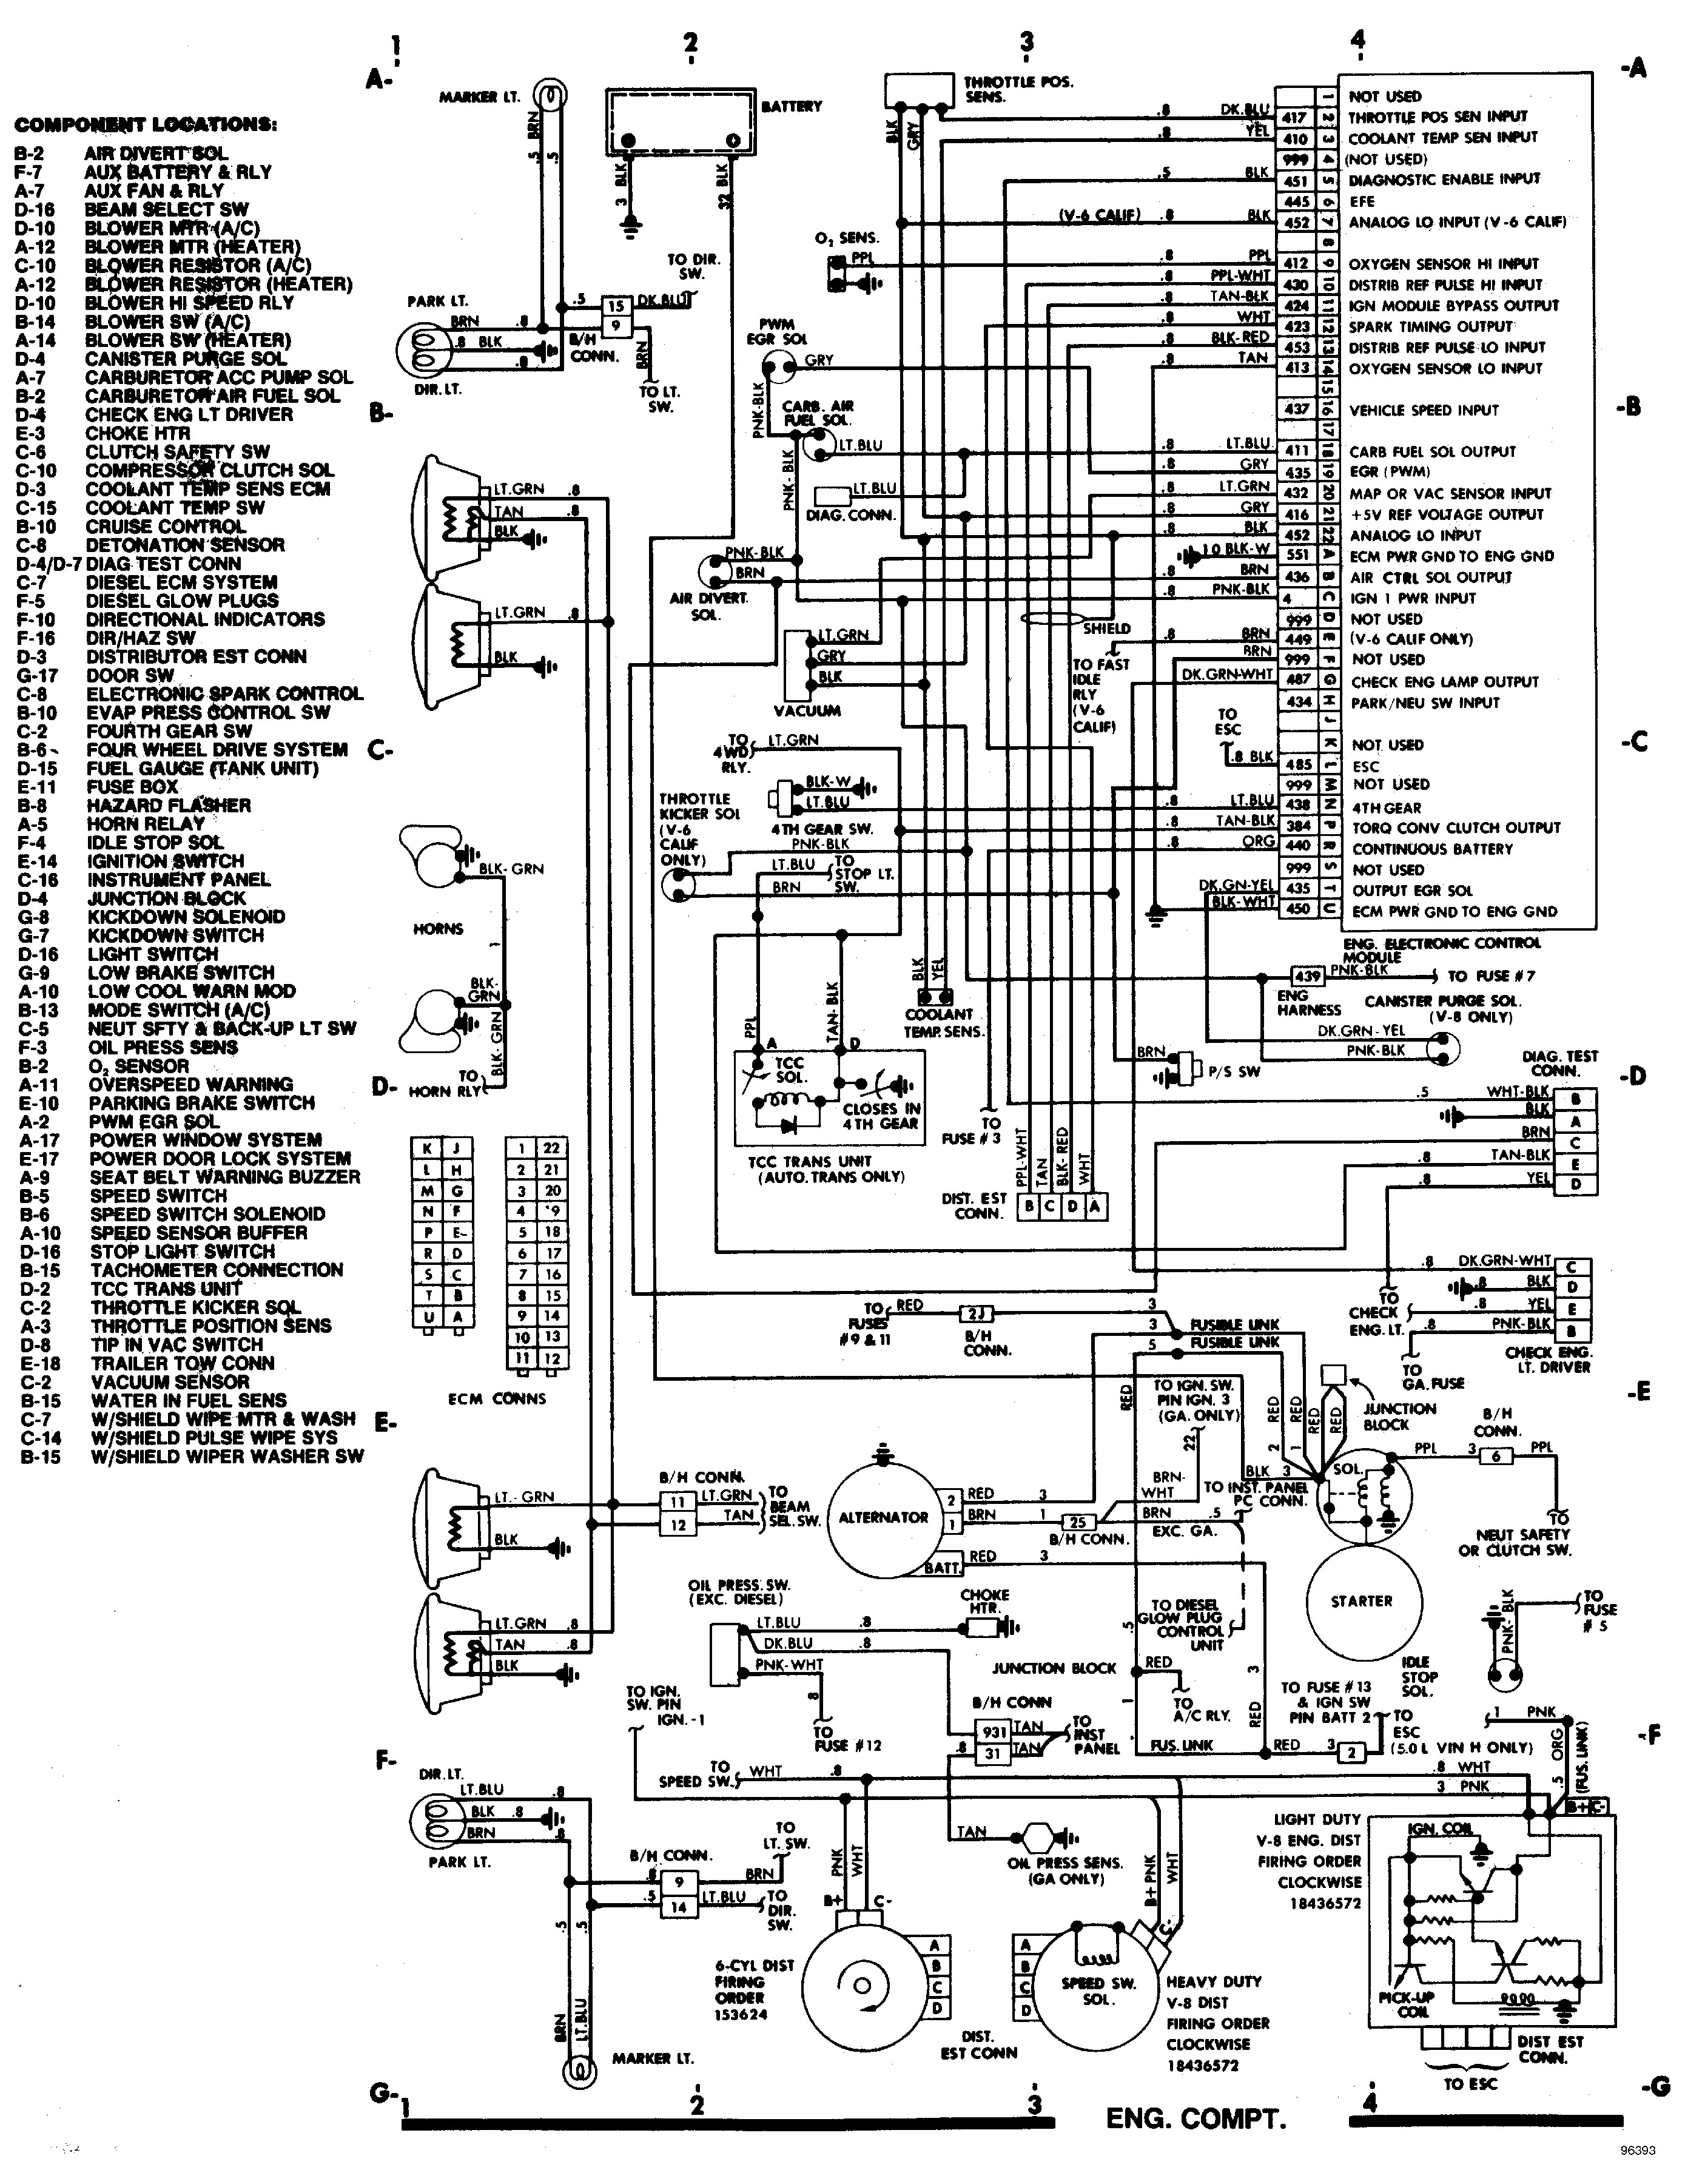 85 chevy truck wiring diagram chevrolet c20 4x2 had battery and rh pinterest